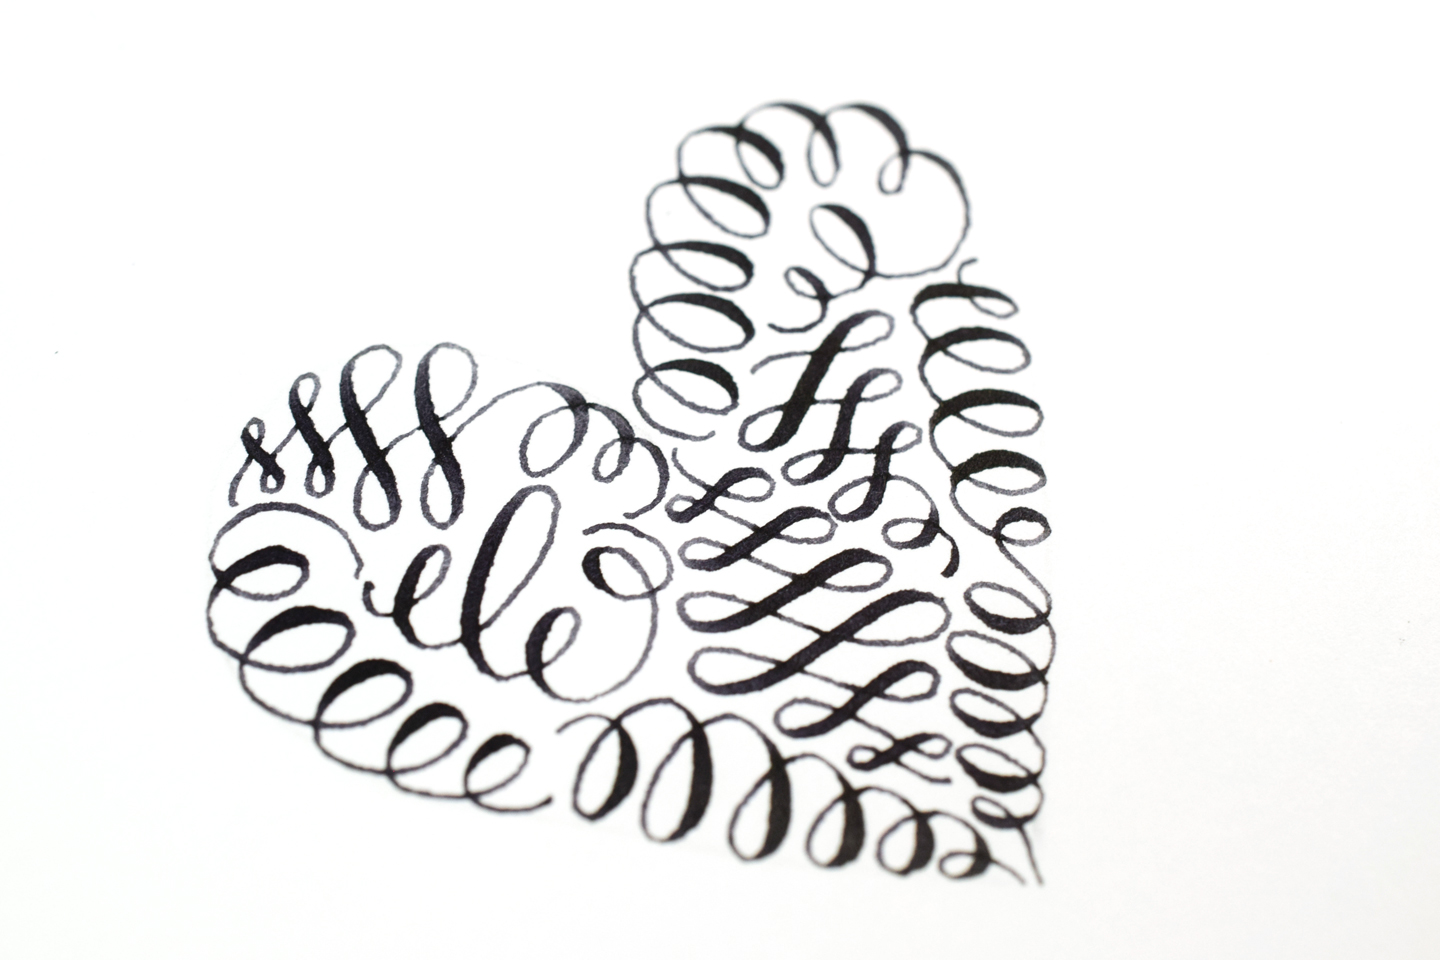 Calligraphy Art Tutorial: How to Make a Flourished … Well, Anything!